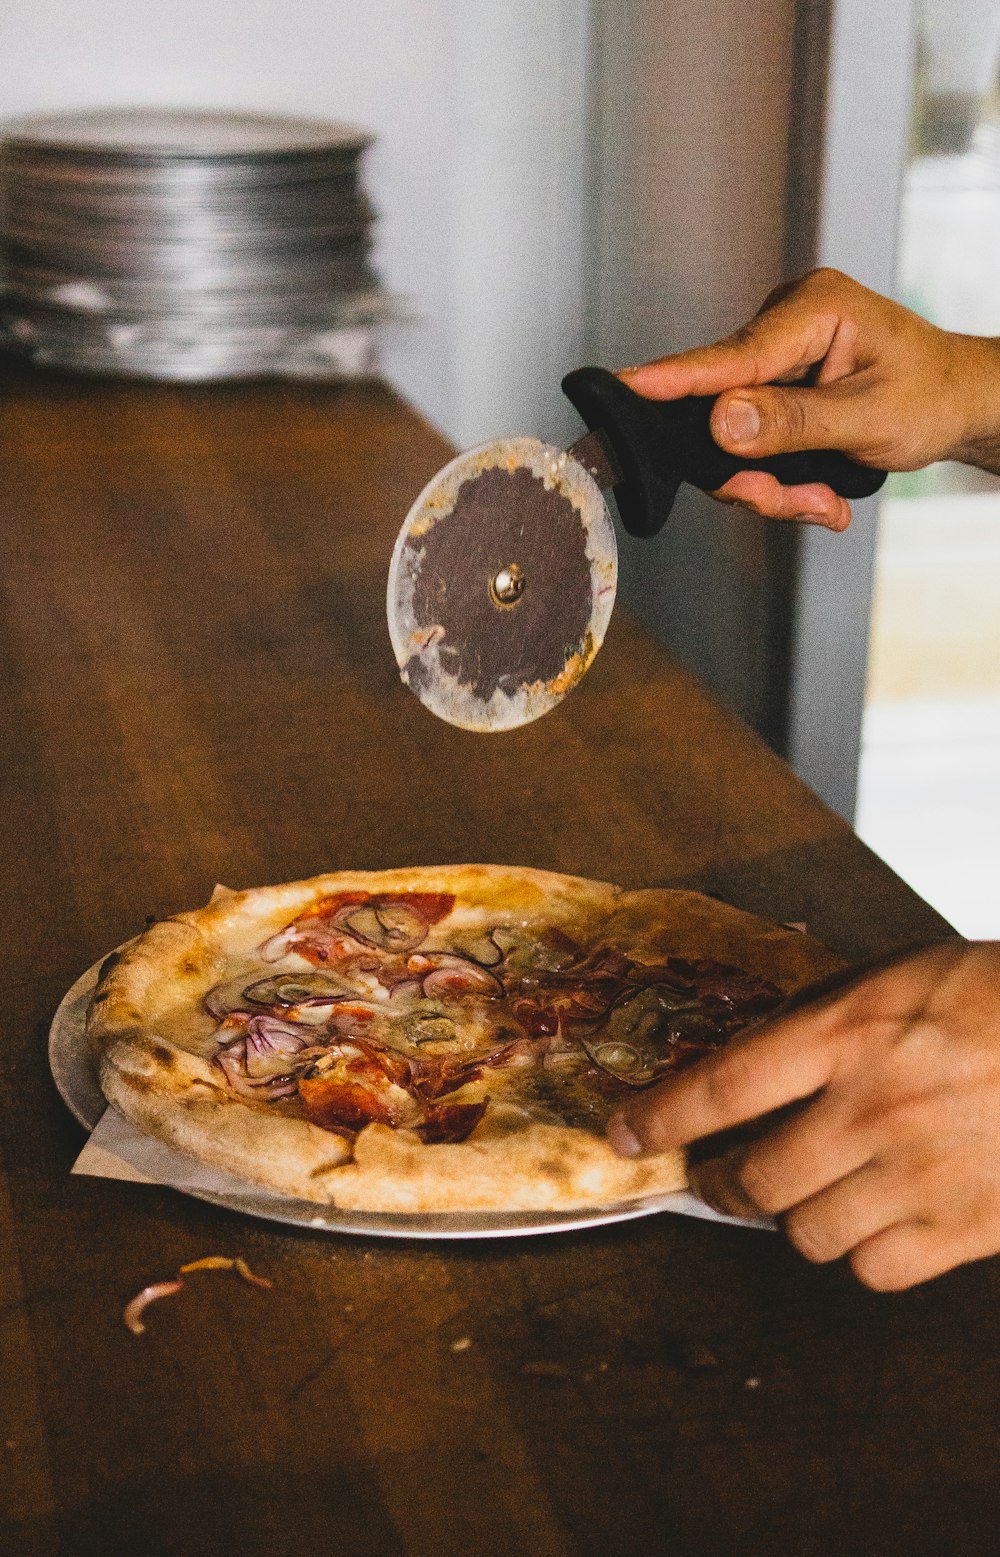 person holding pizza slicer over pizza